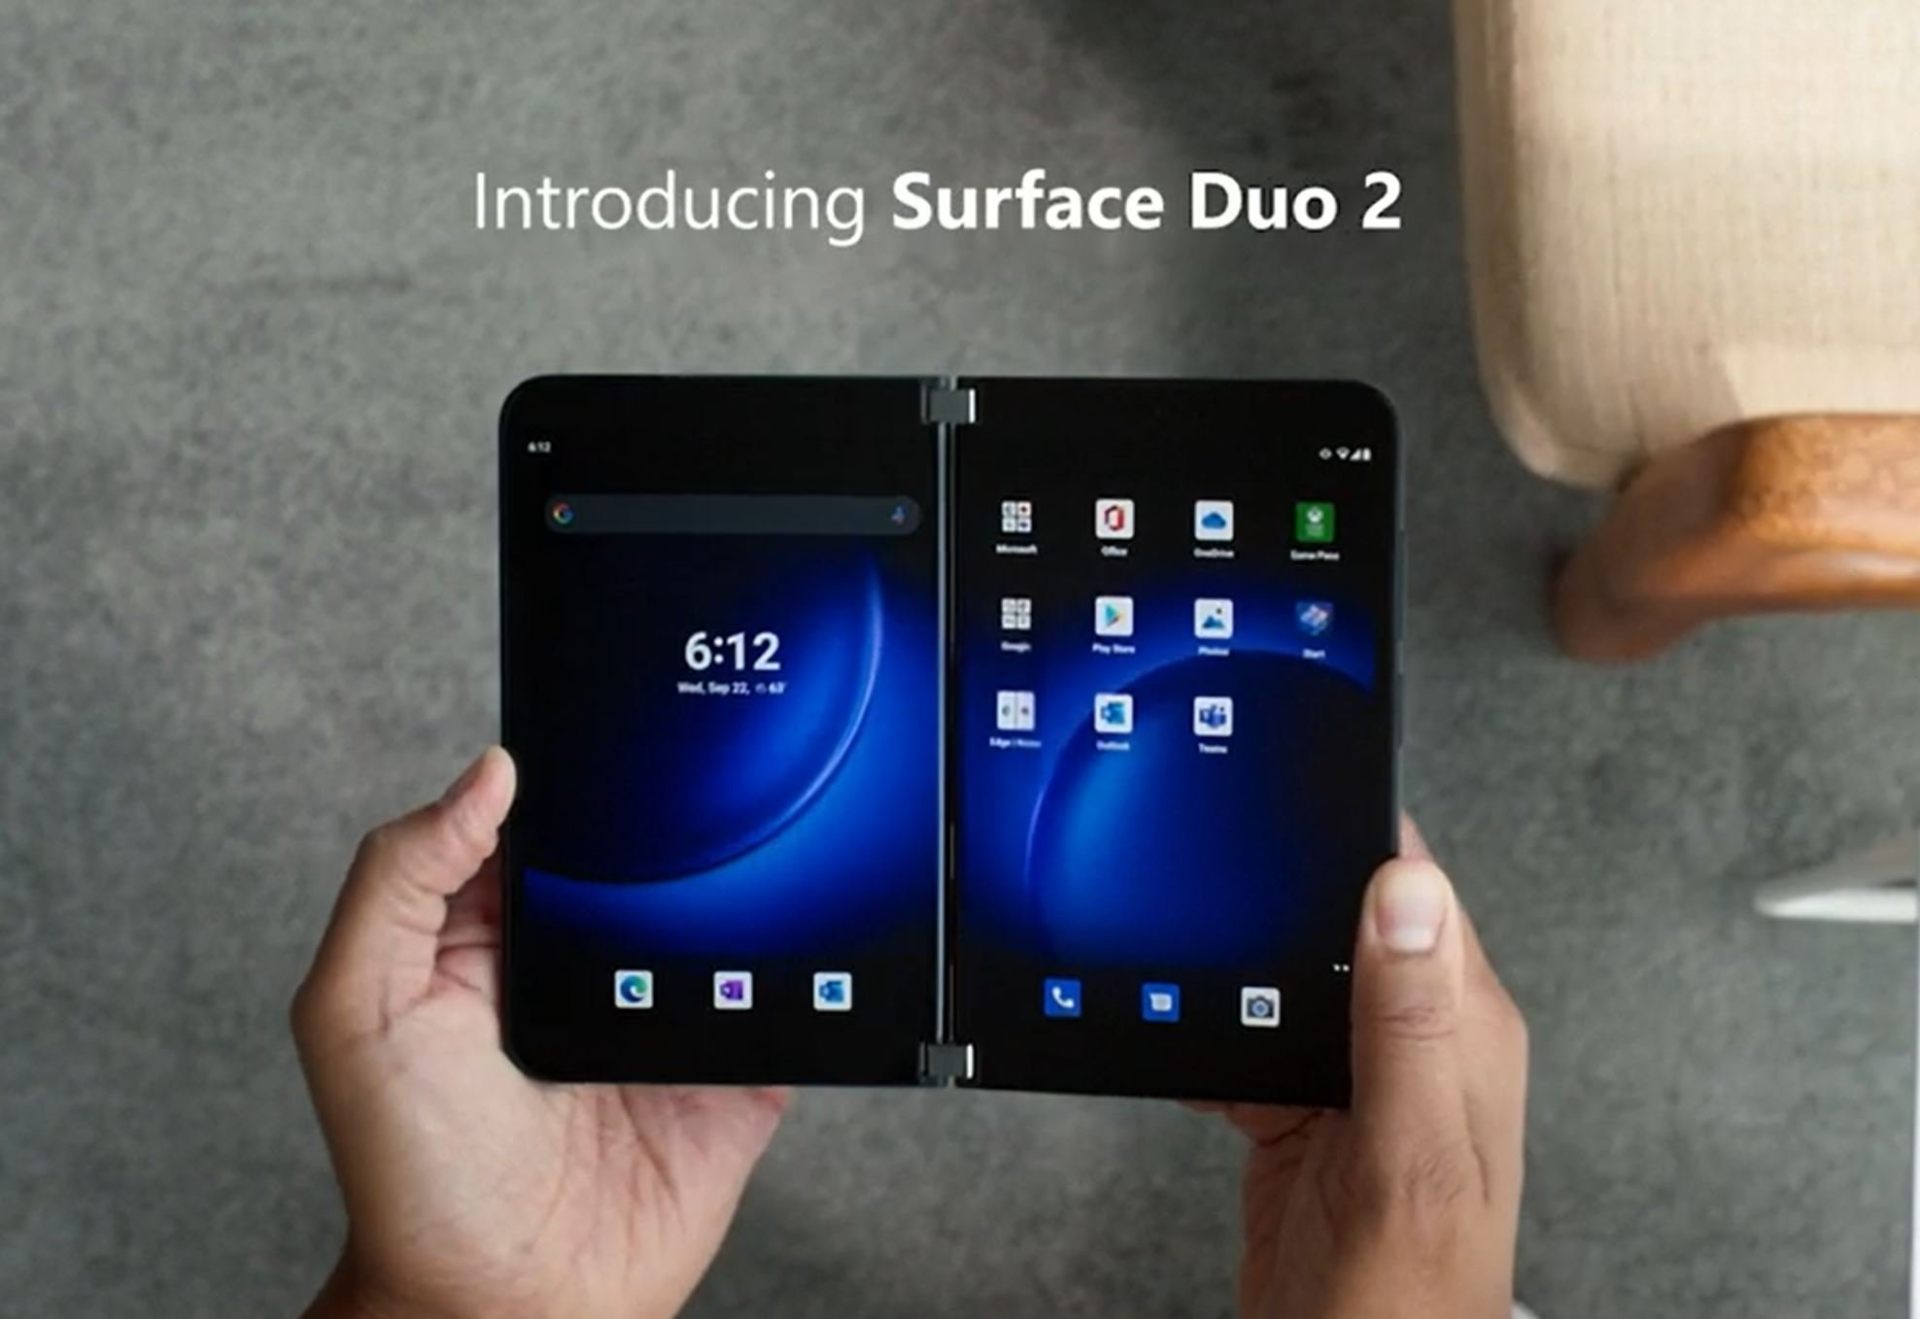 Discover Surface Duo 2 - Microsoft's New Folding Cell Phone